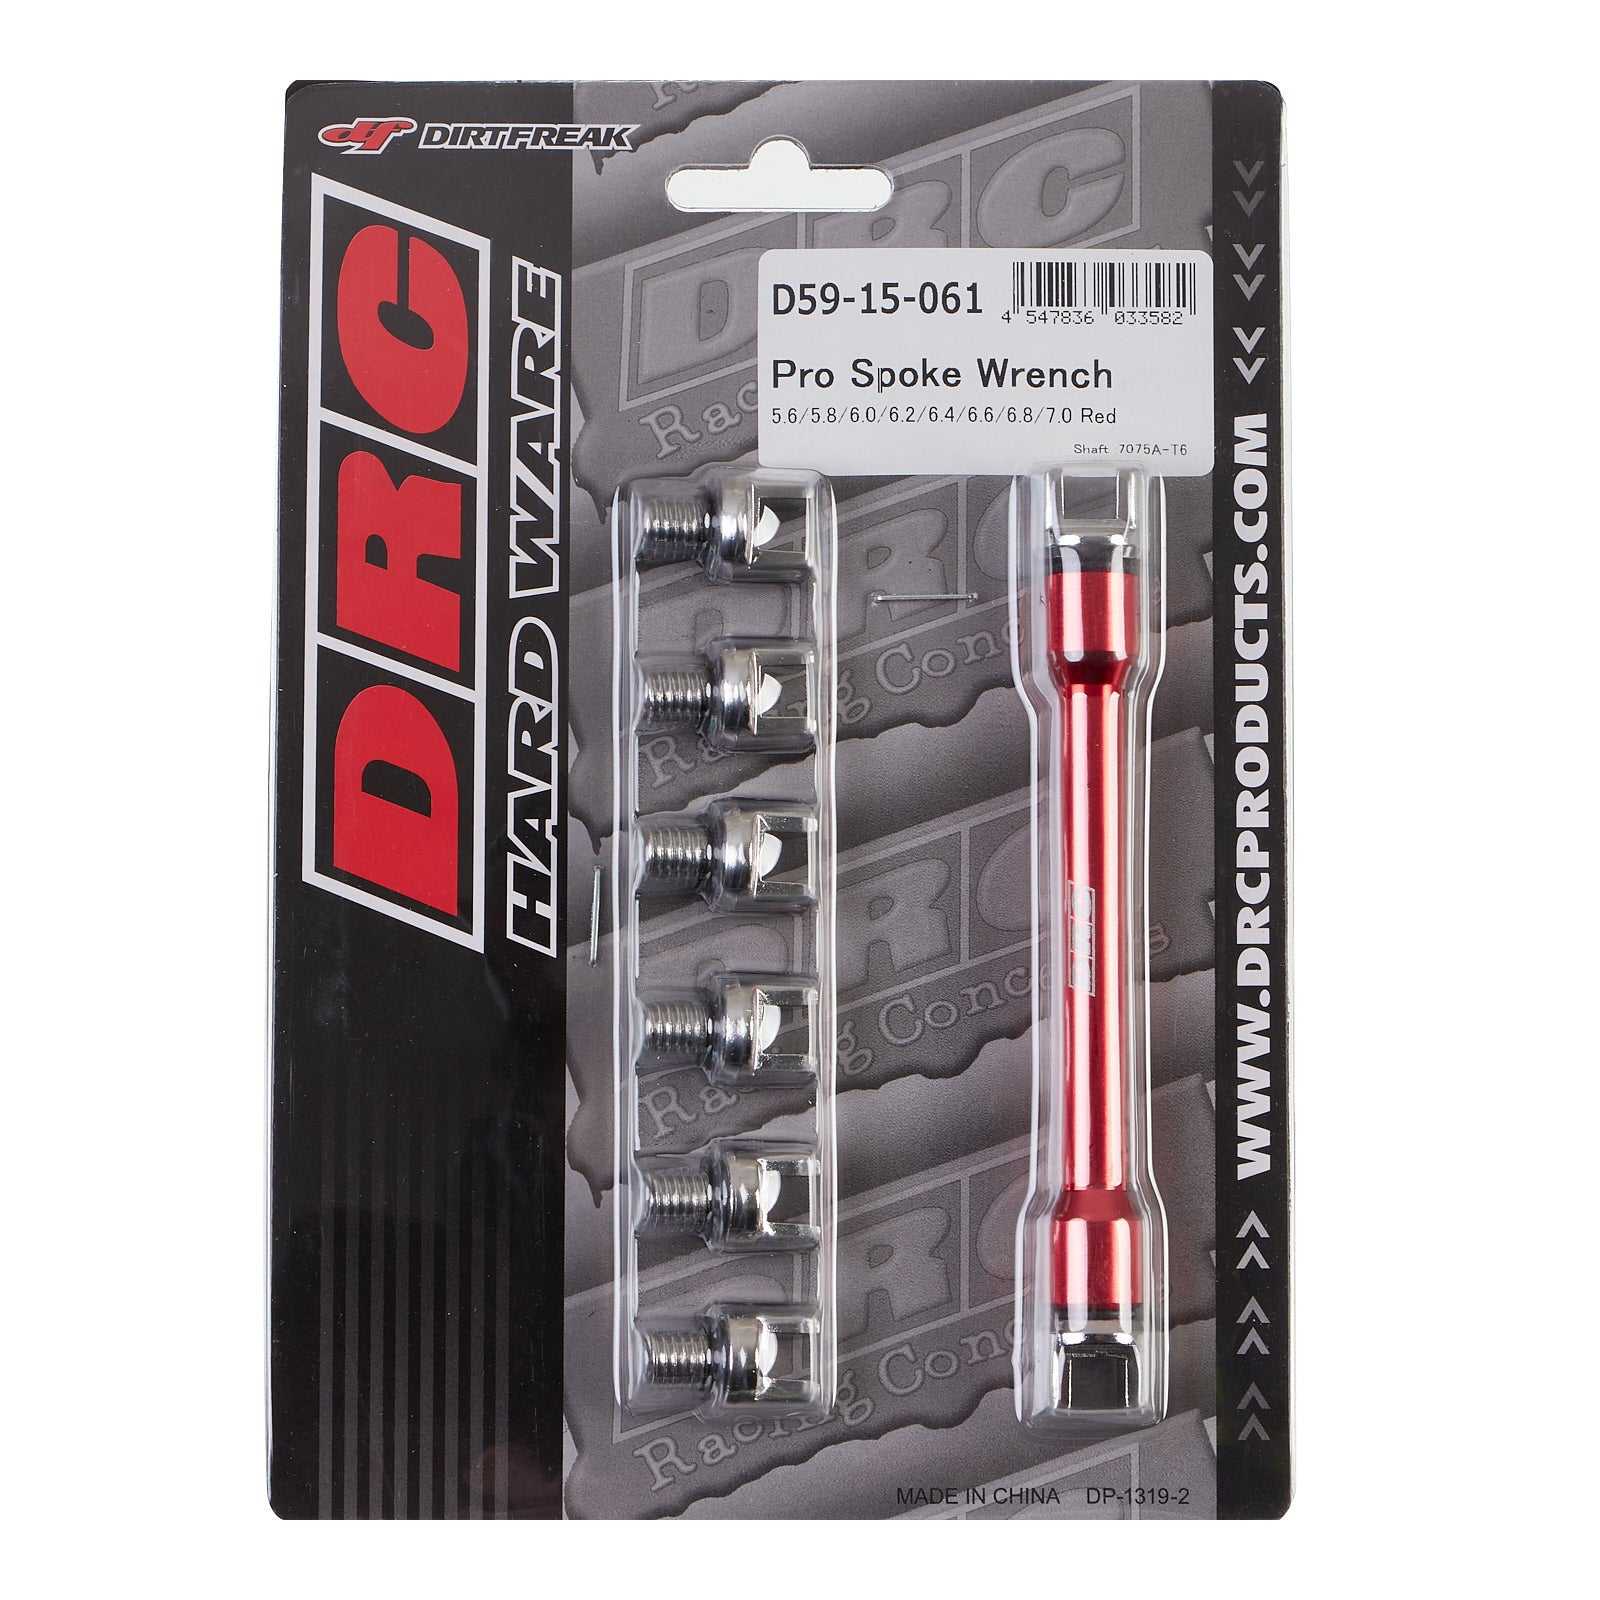 DRC, DRC PRO SPOKE WRENCH 5.6-7.0 RED